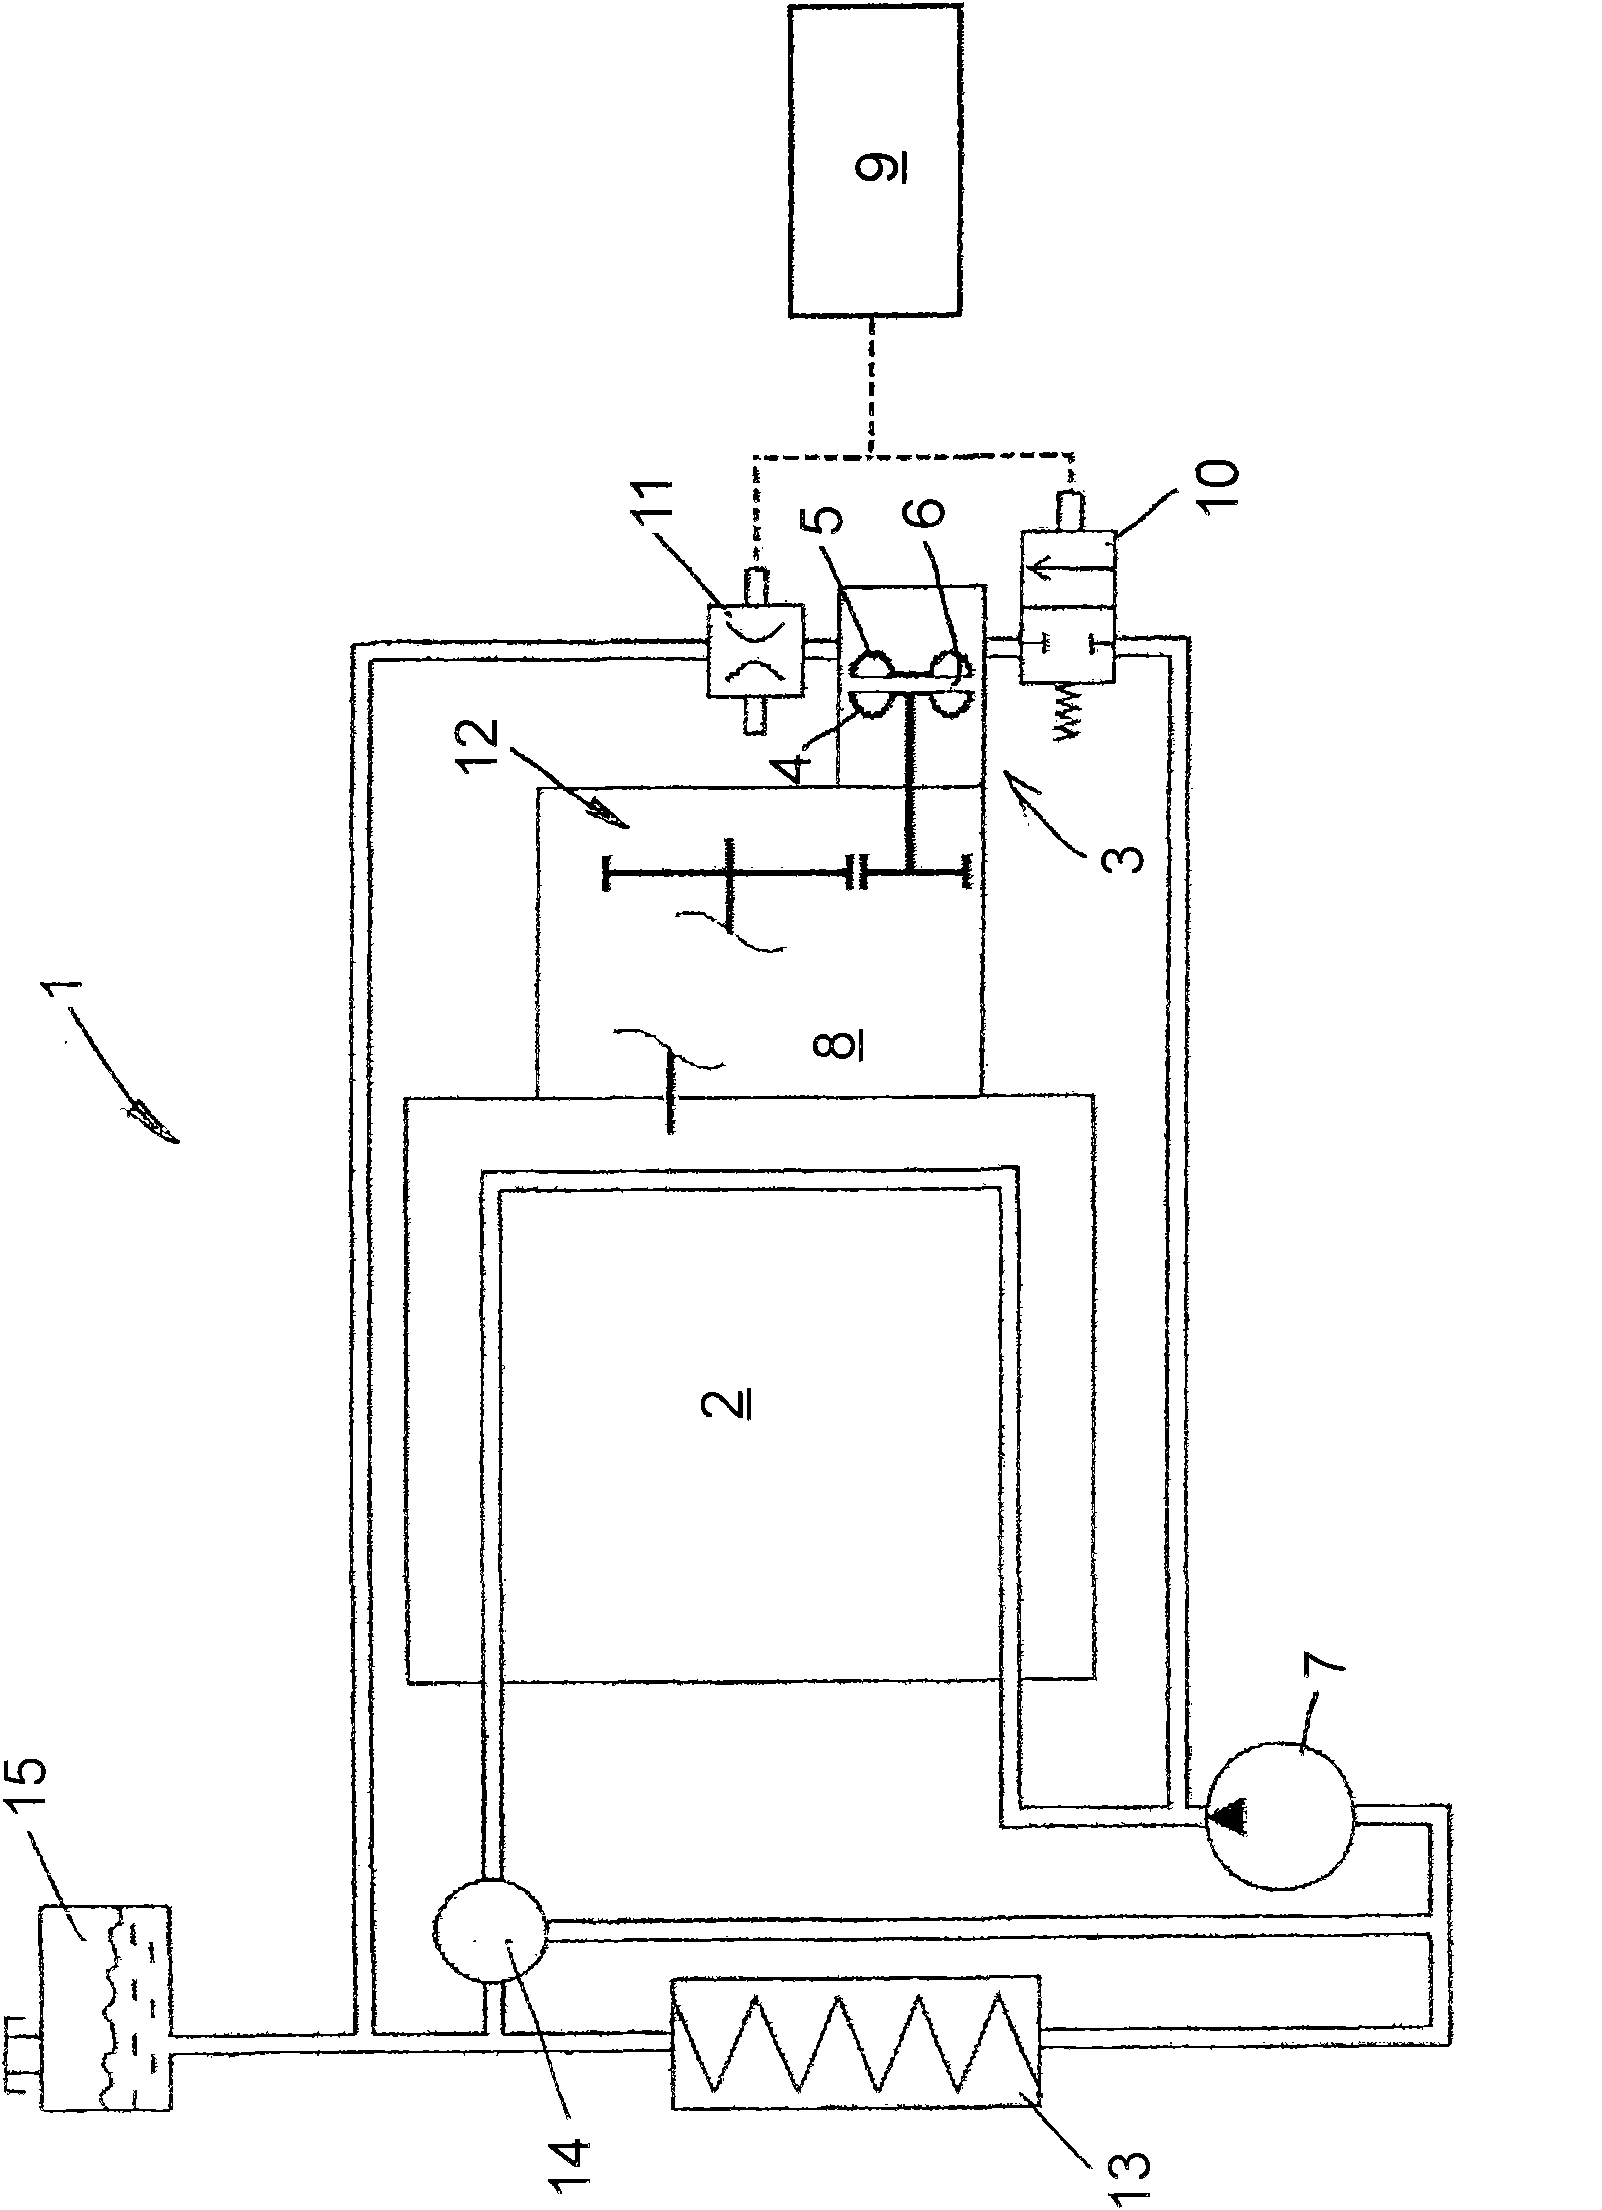 Method for setting exact filling level of cooling medium in cooling circuit of a vehicle